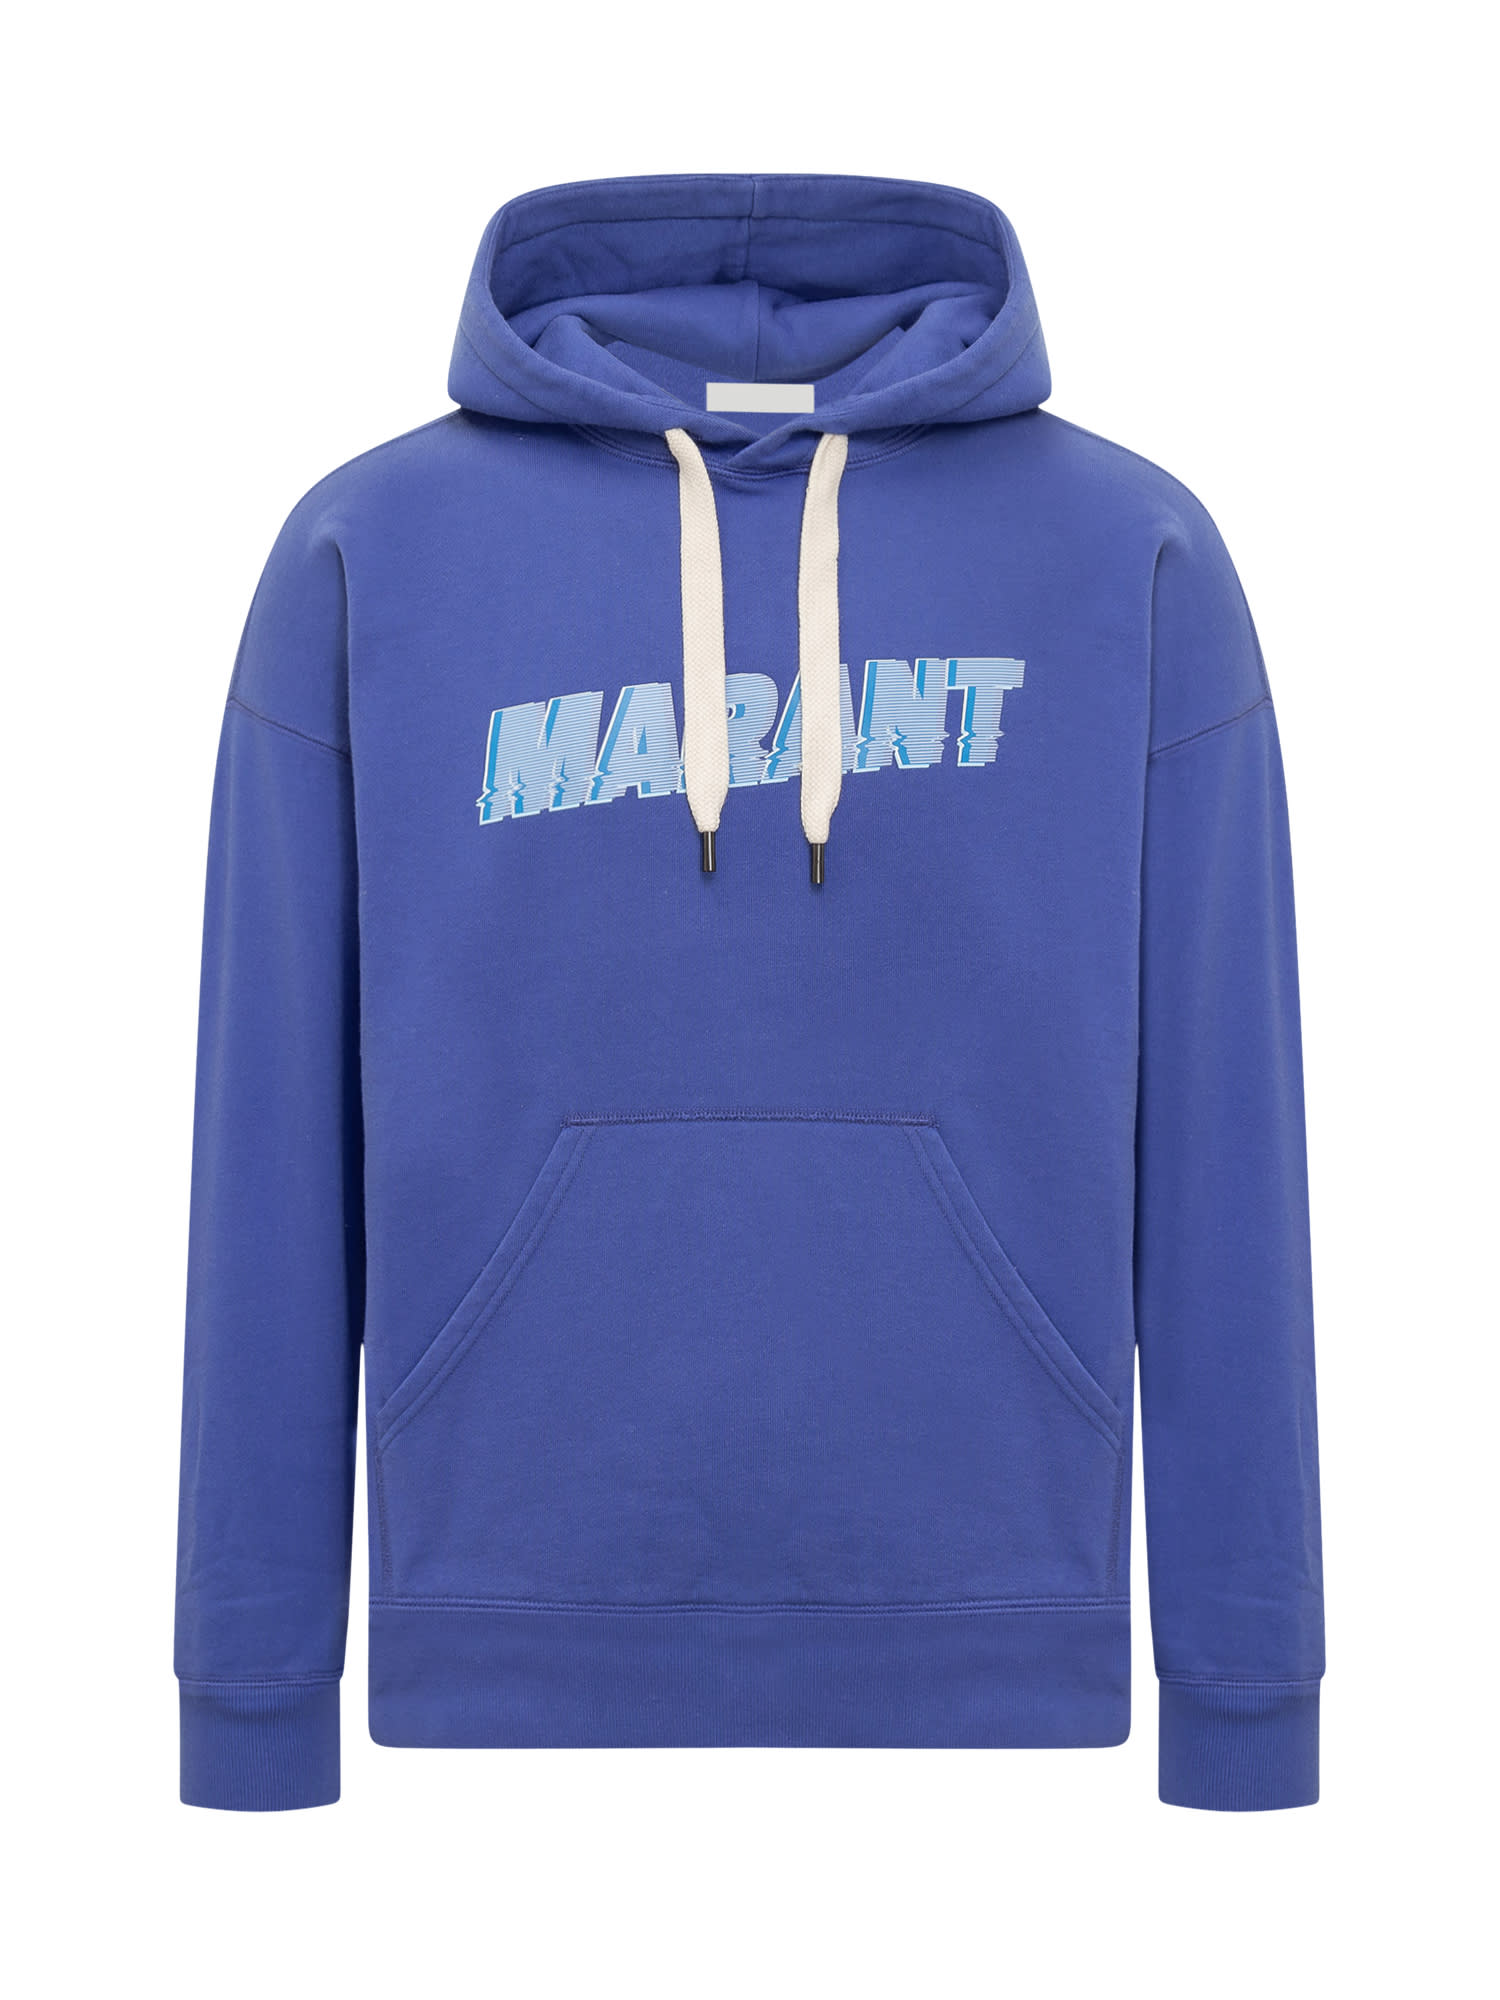 ISABEL MARANT HOODIE WITH LOGO